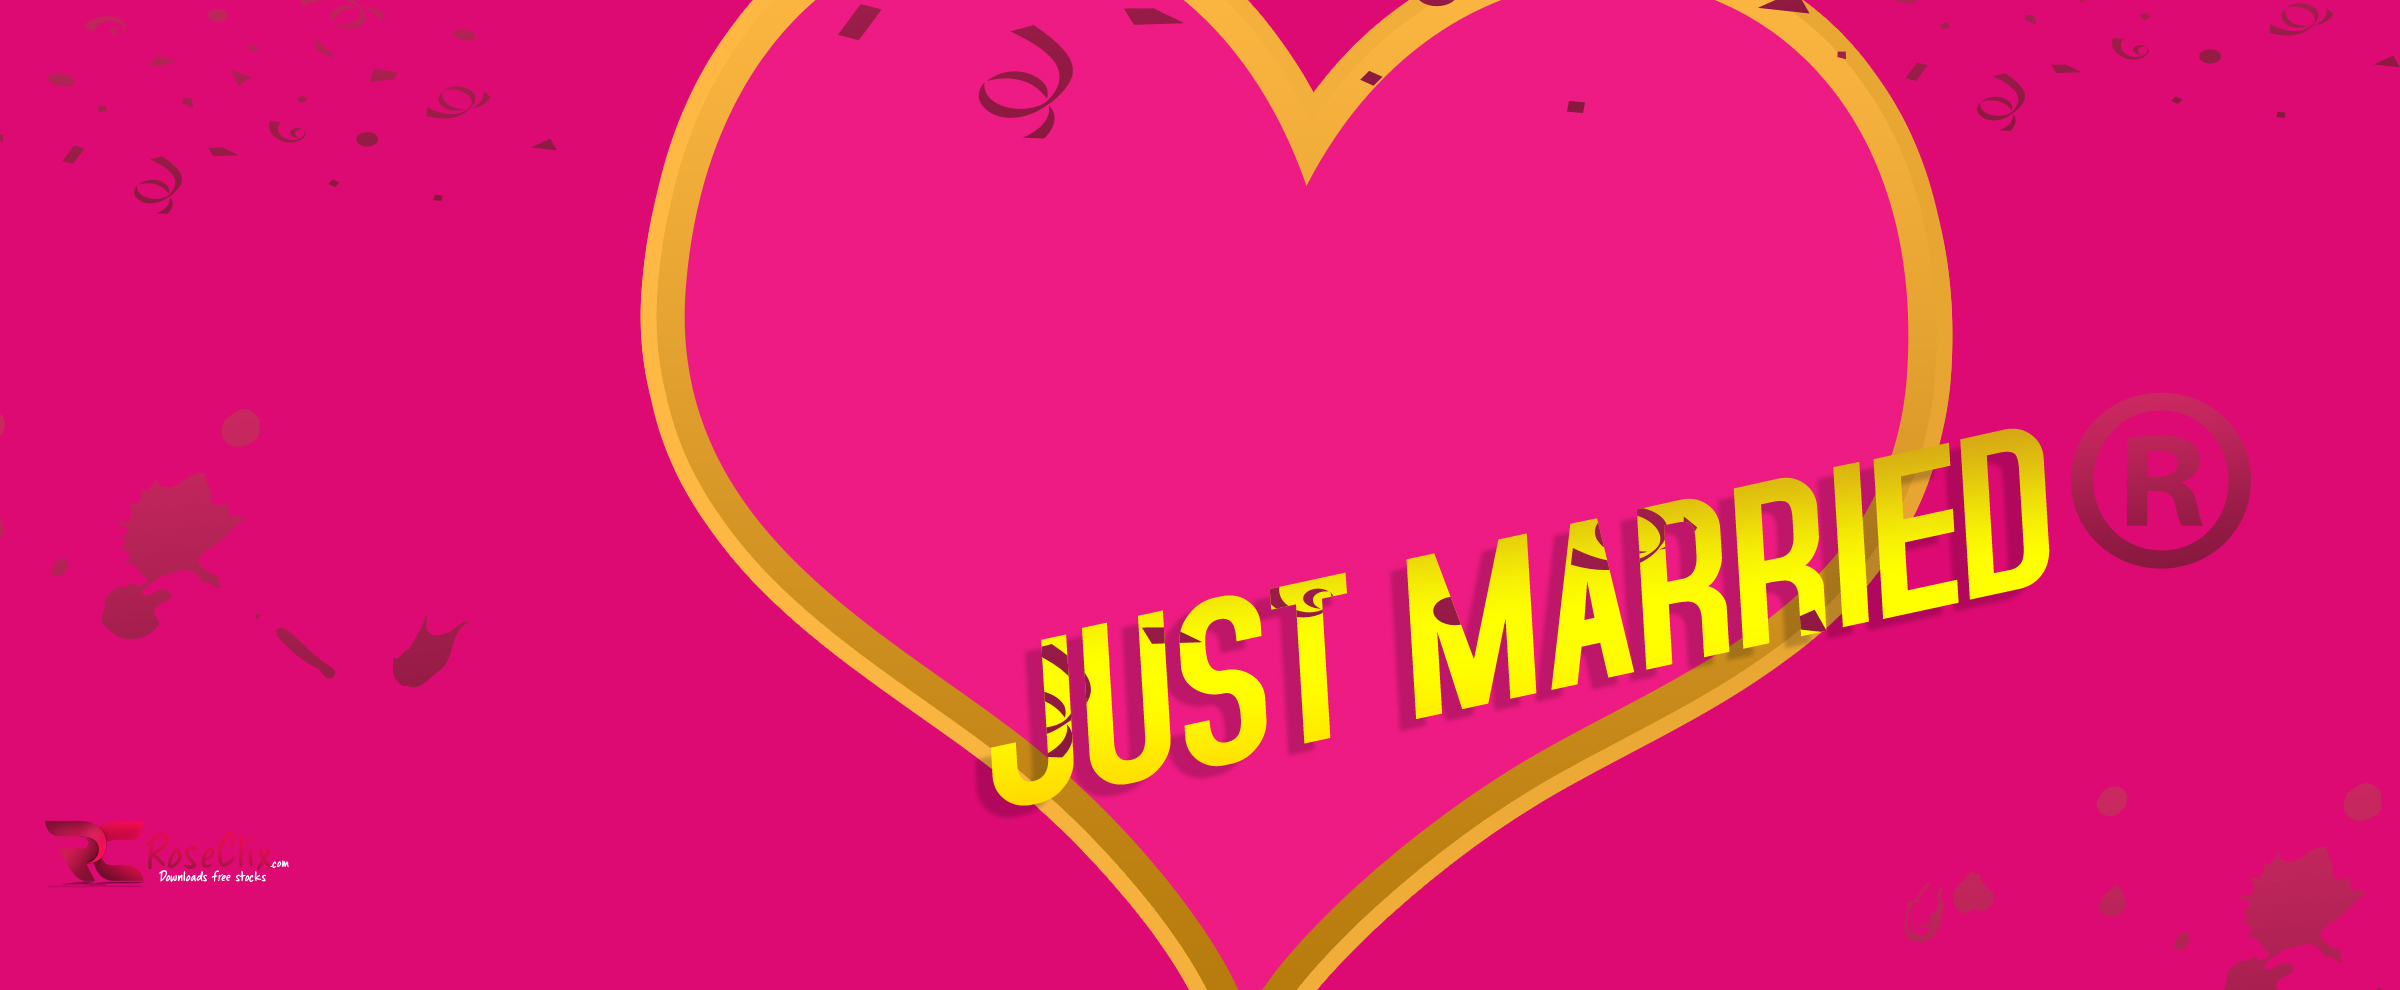 Just Married Facebook Timeline Cover - Heart , HD Wallpaper & Backgrounds